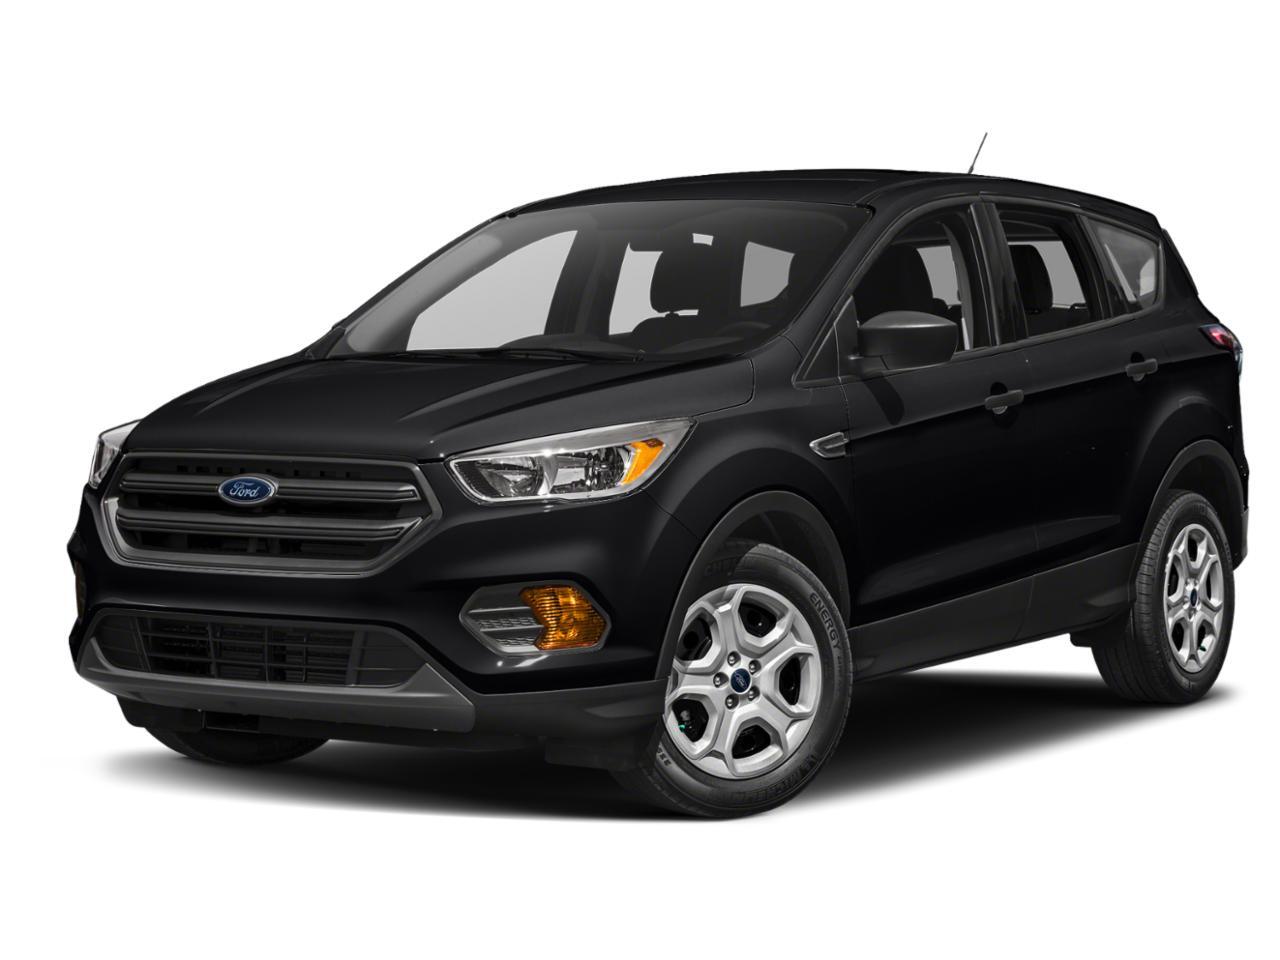 2018 Ford Escape SEL 4WD| KEYLESS ENRTY| BACKUP CAM| HEATED SEATS